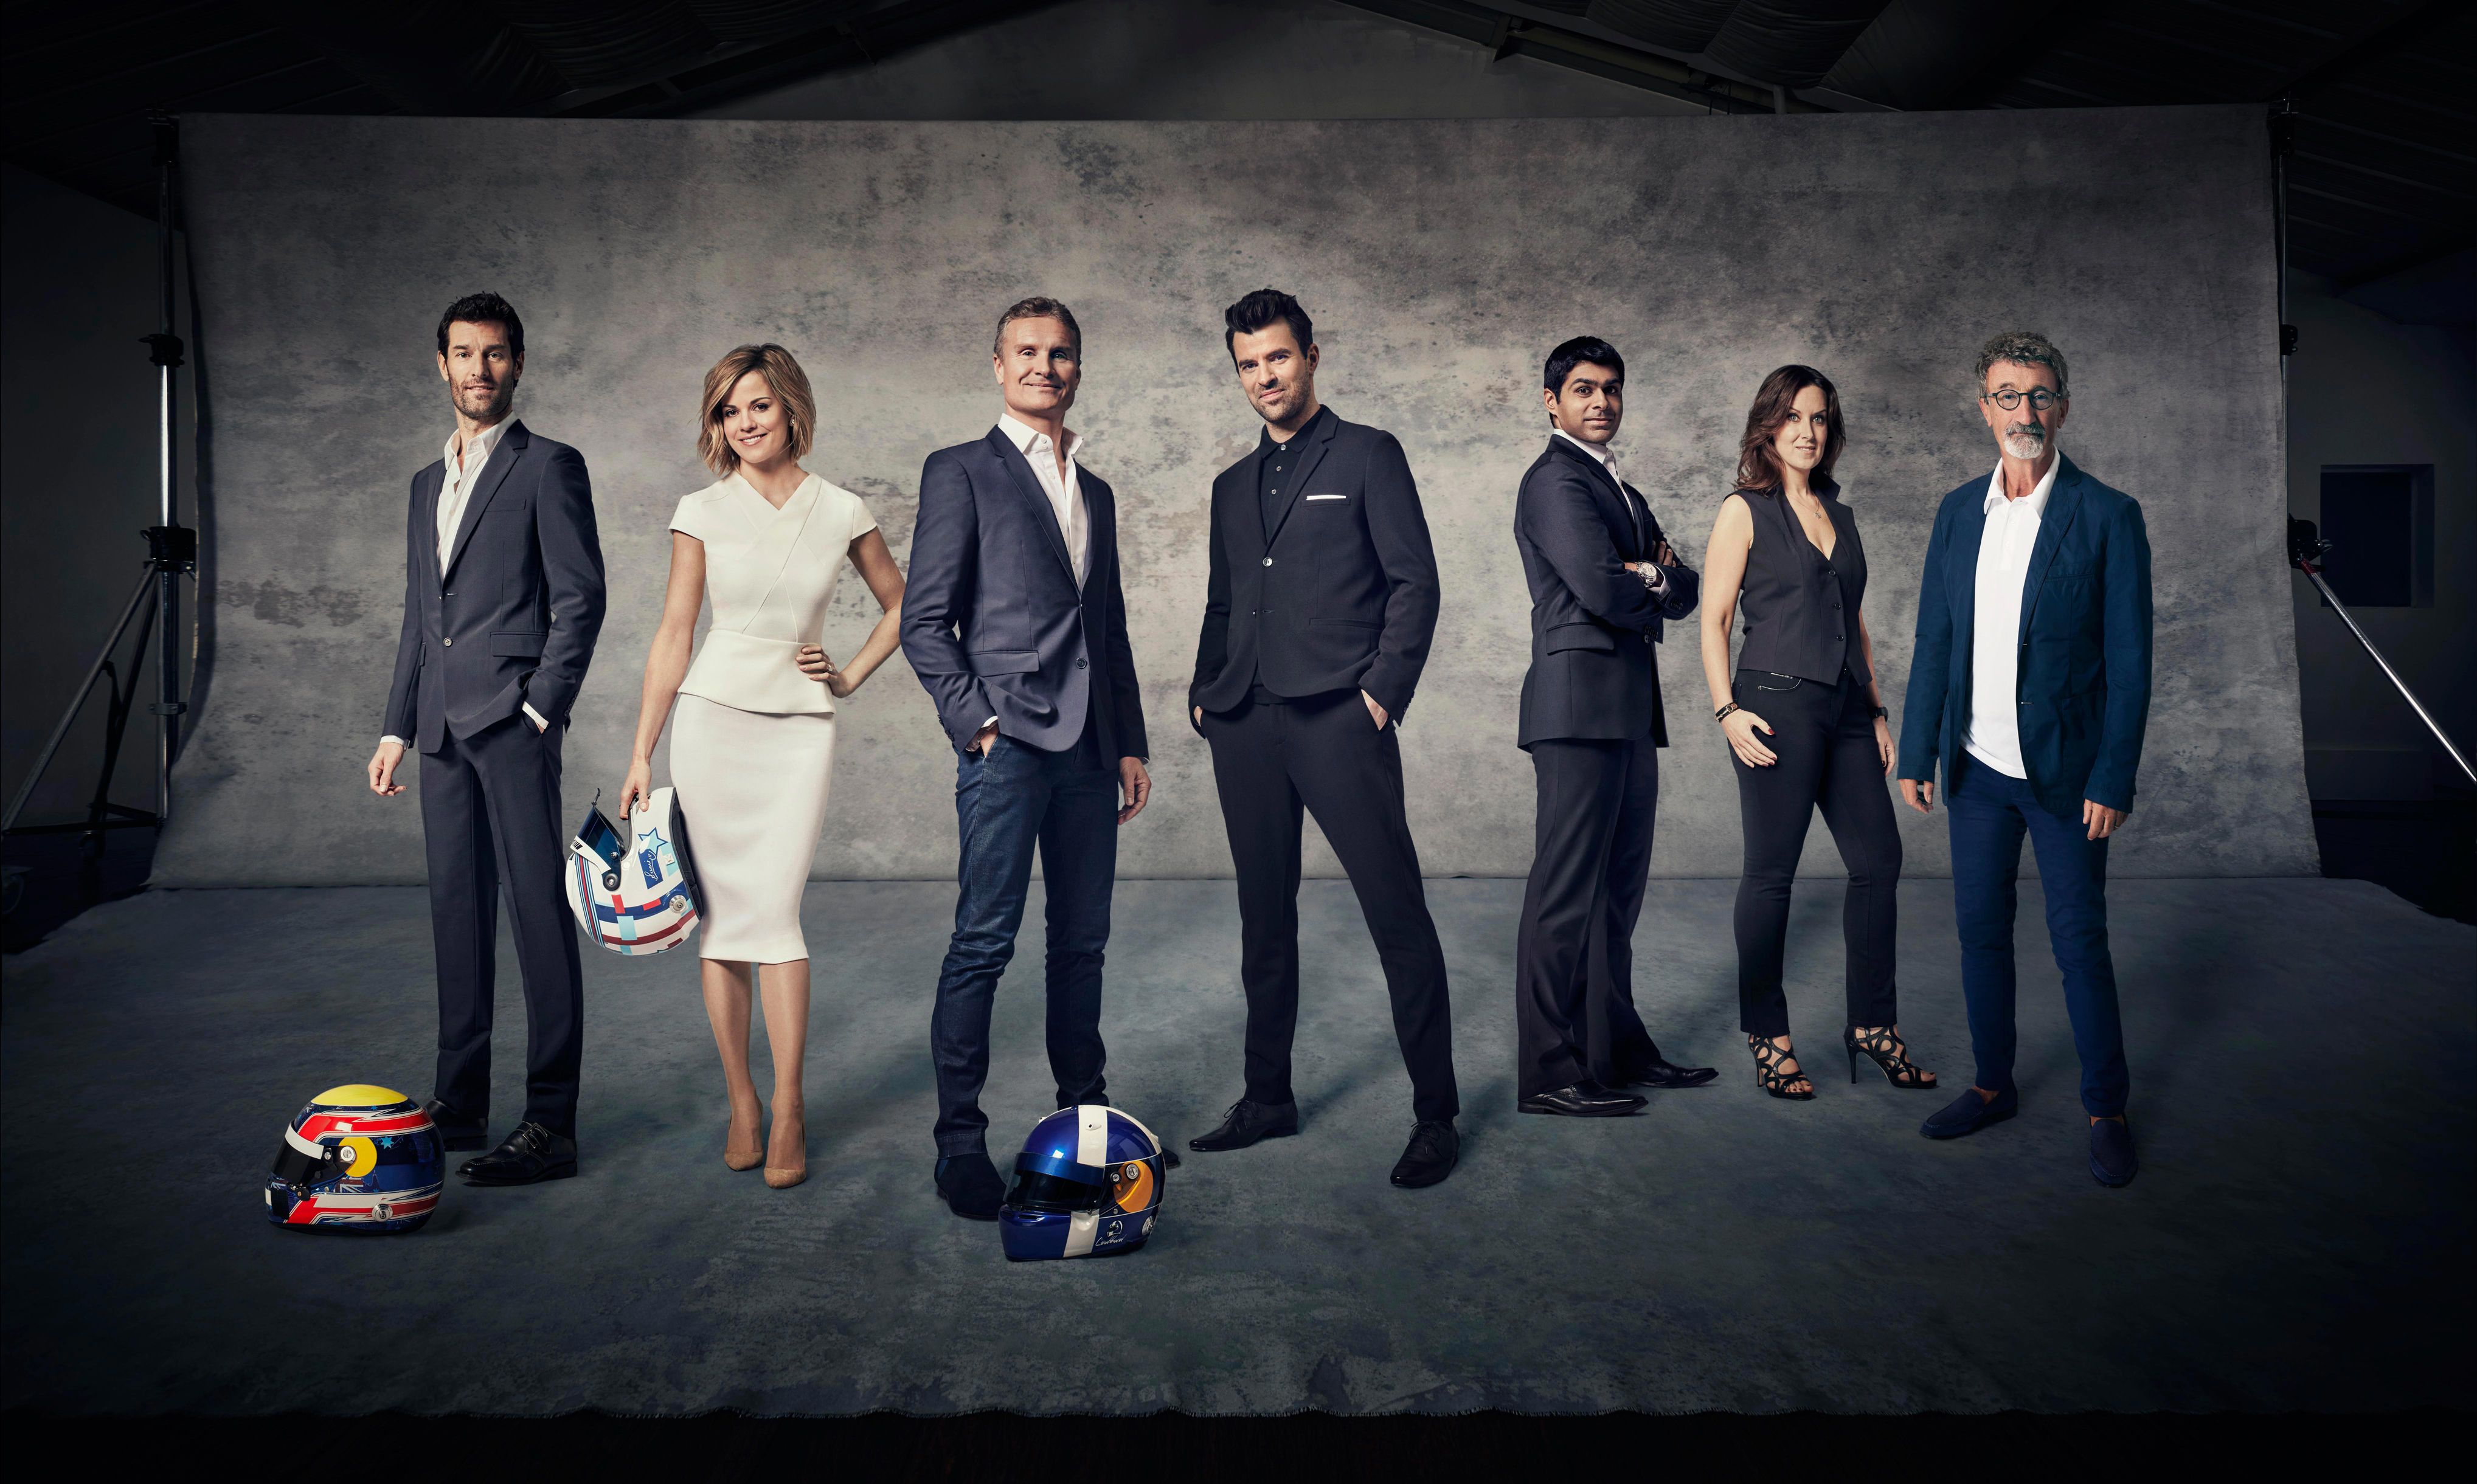 Channel 4 F1 presenters Whos joining Steve Jones, David Coulthard and Murray Walker on the new team for 2016?